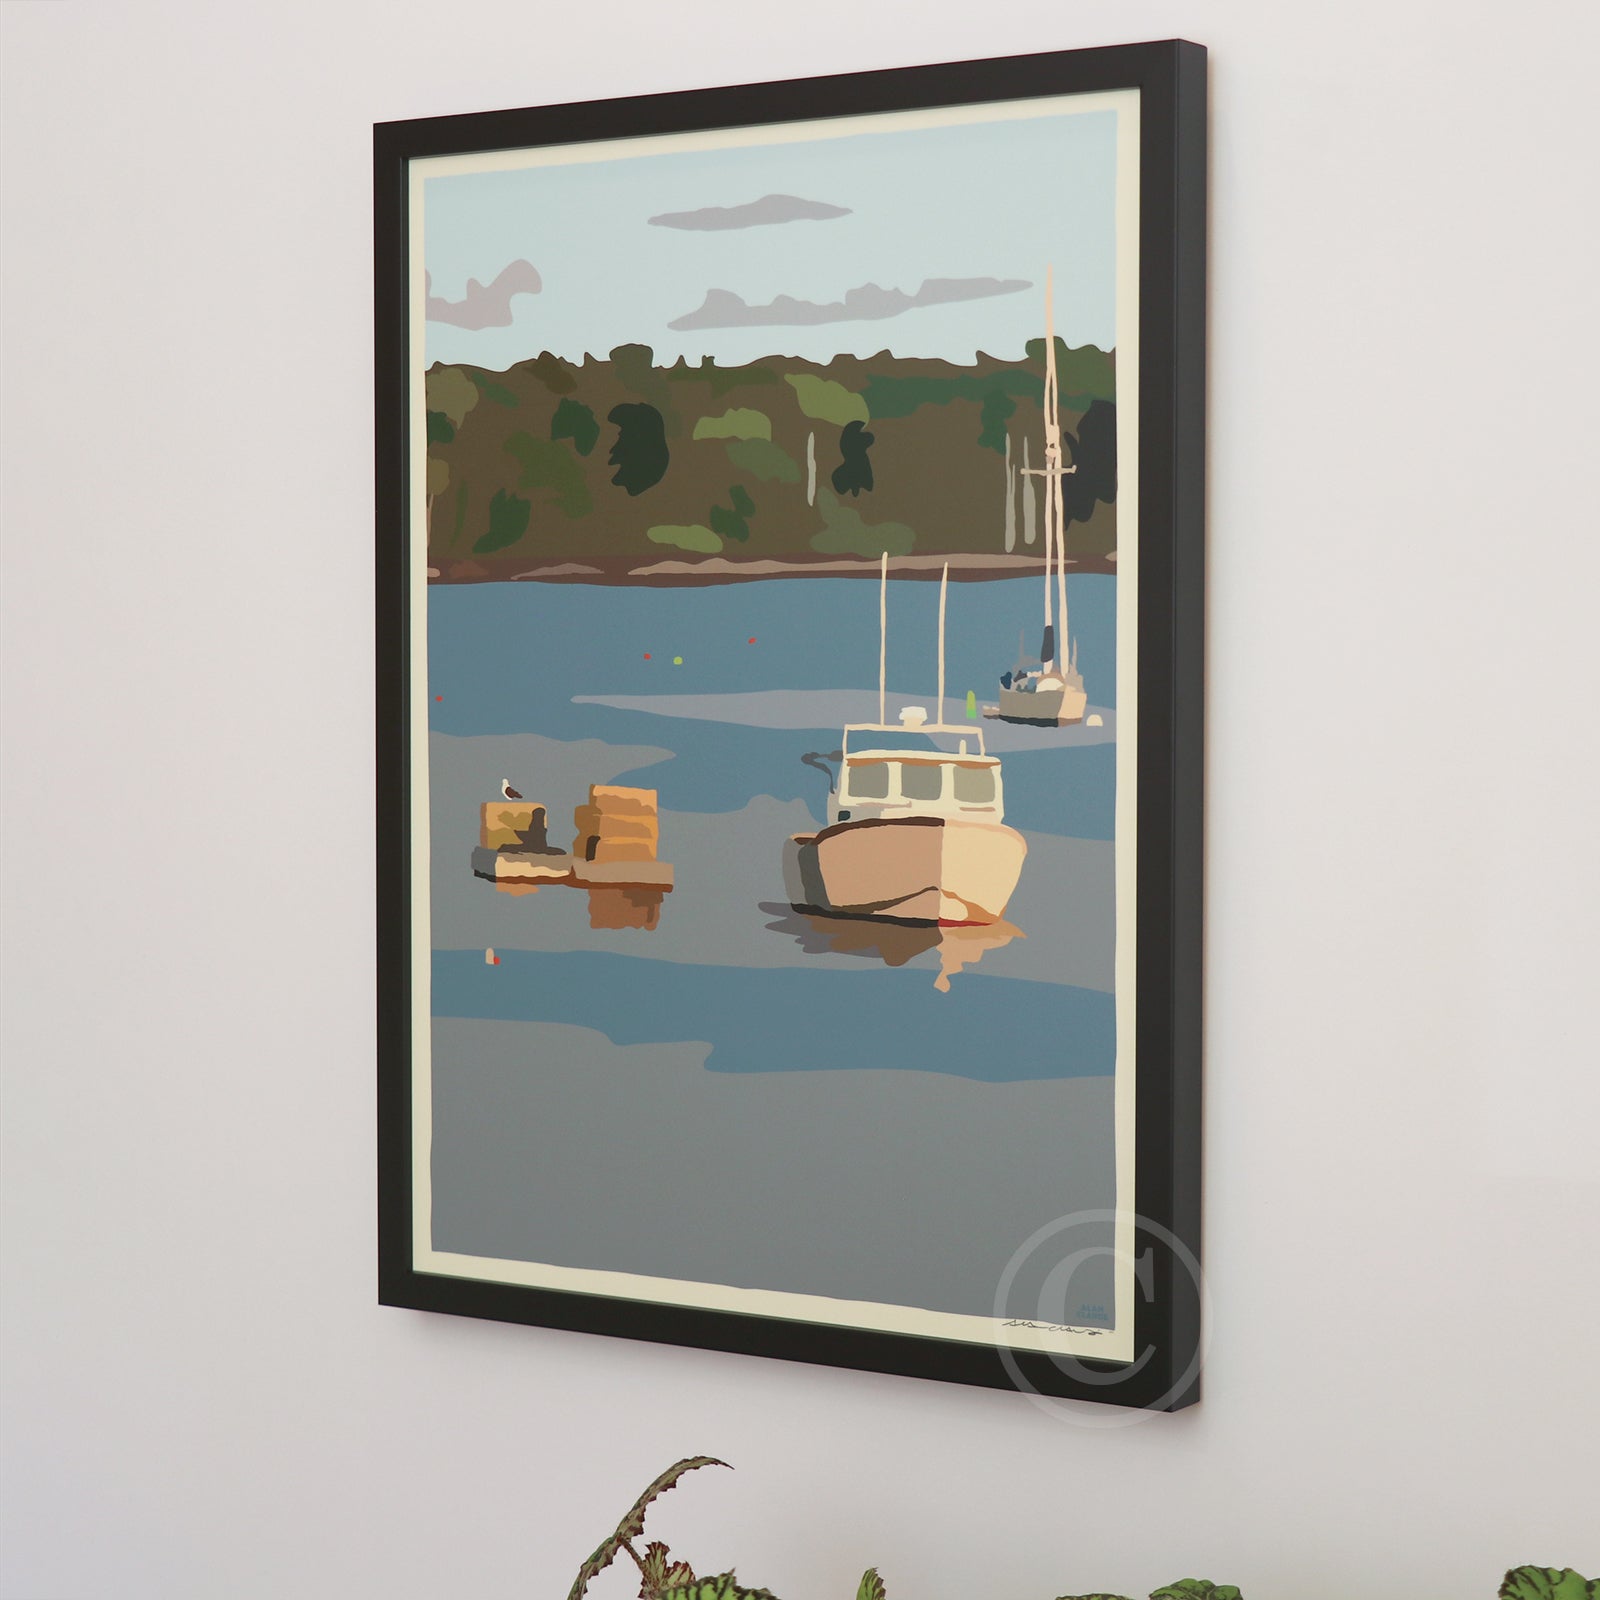 Lobster Boat in Round Pond Harbor Art Print 18" x 24” Vertical Framed Wall Poster By Alan Claude - Maine